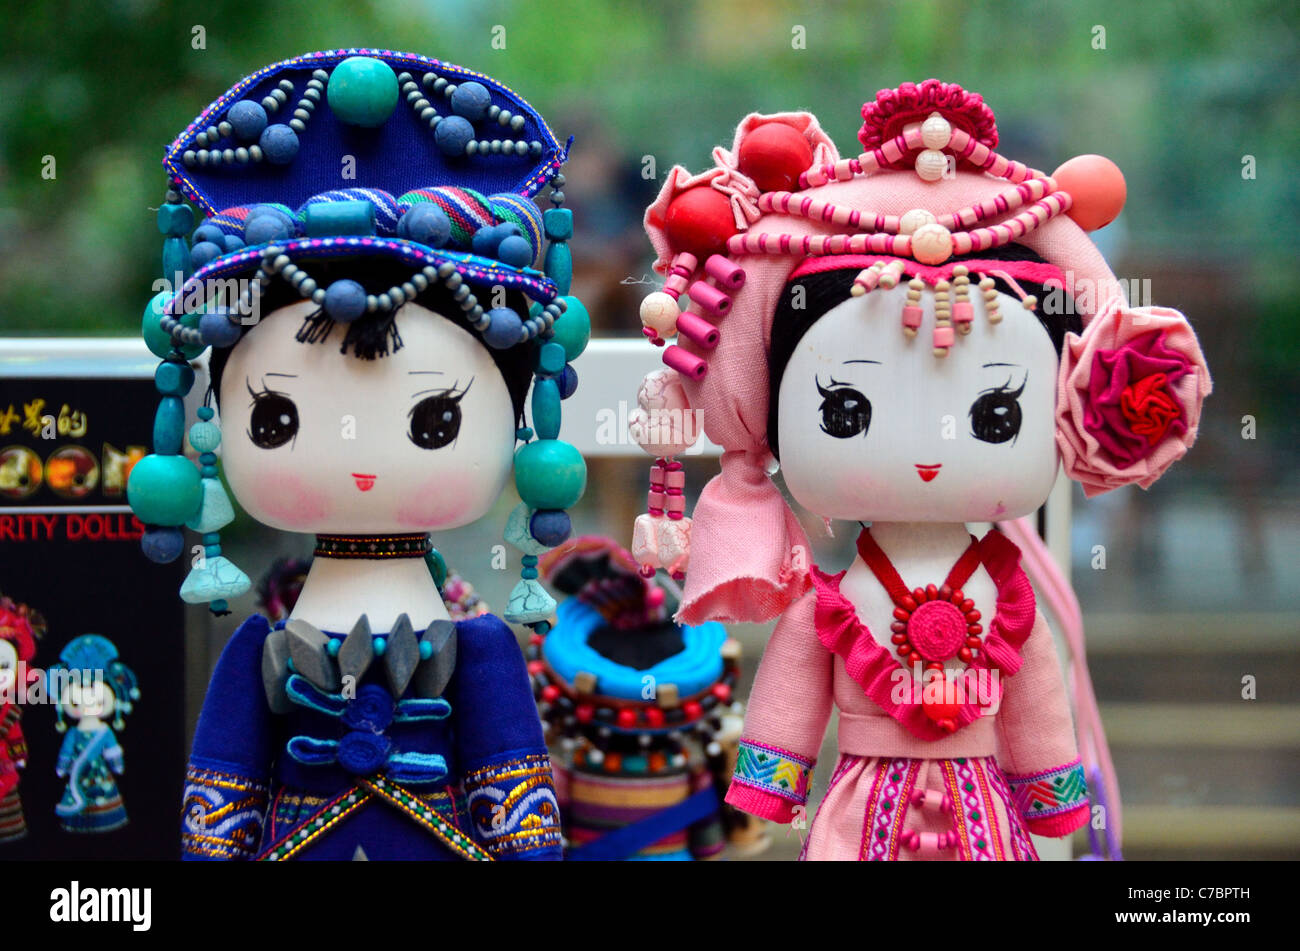 Dolls with colorful dresses and decorations. Sichuan, China. Stock Photo